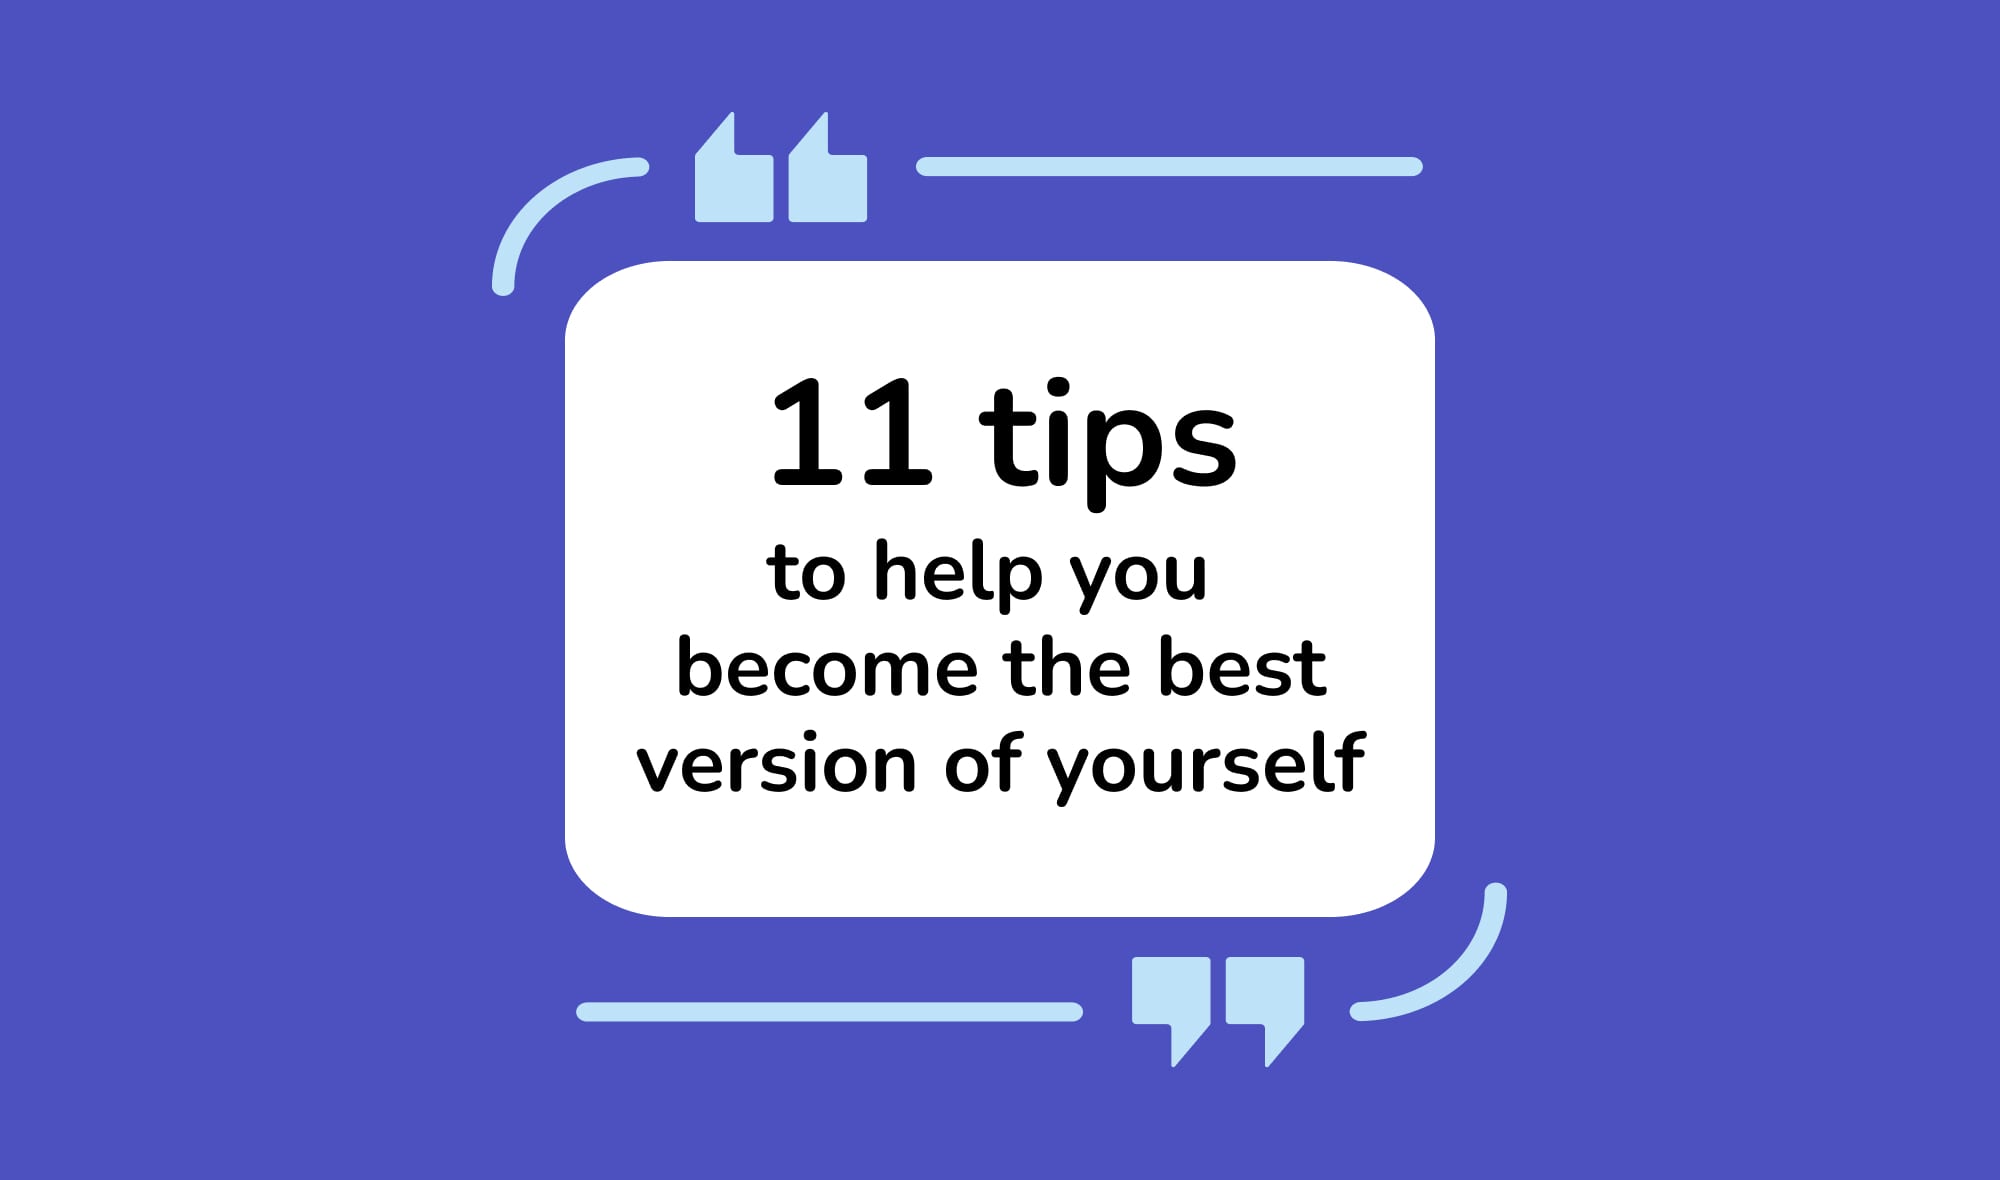 11 tips to help you become the best version of yourself